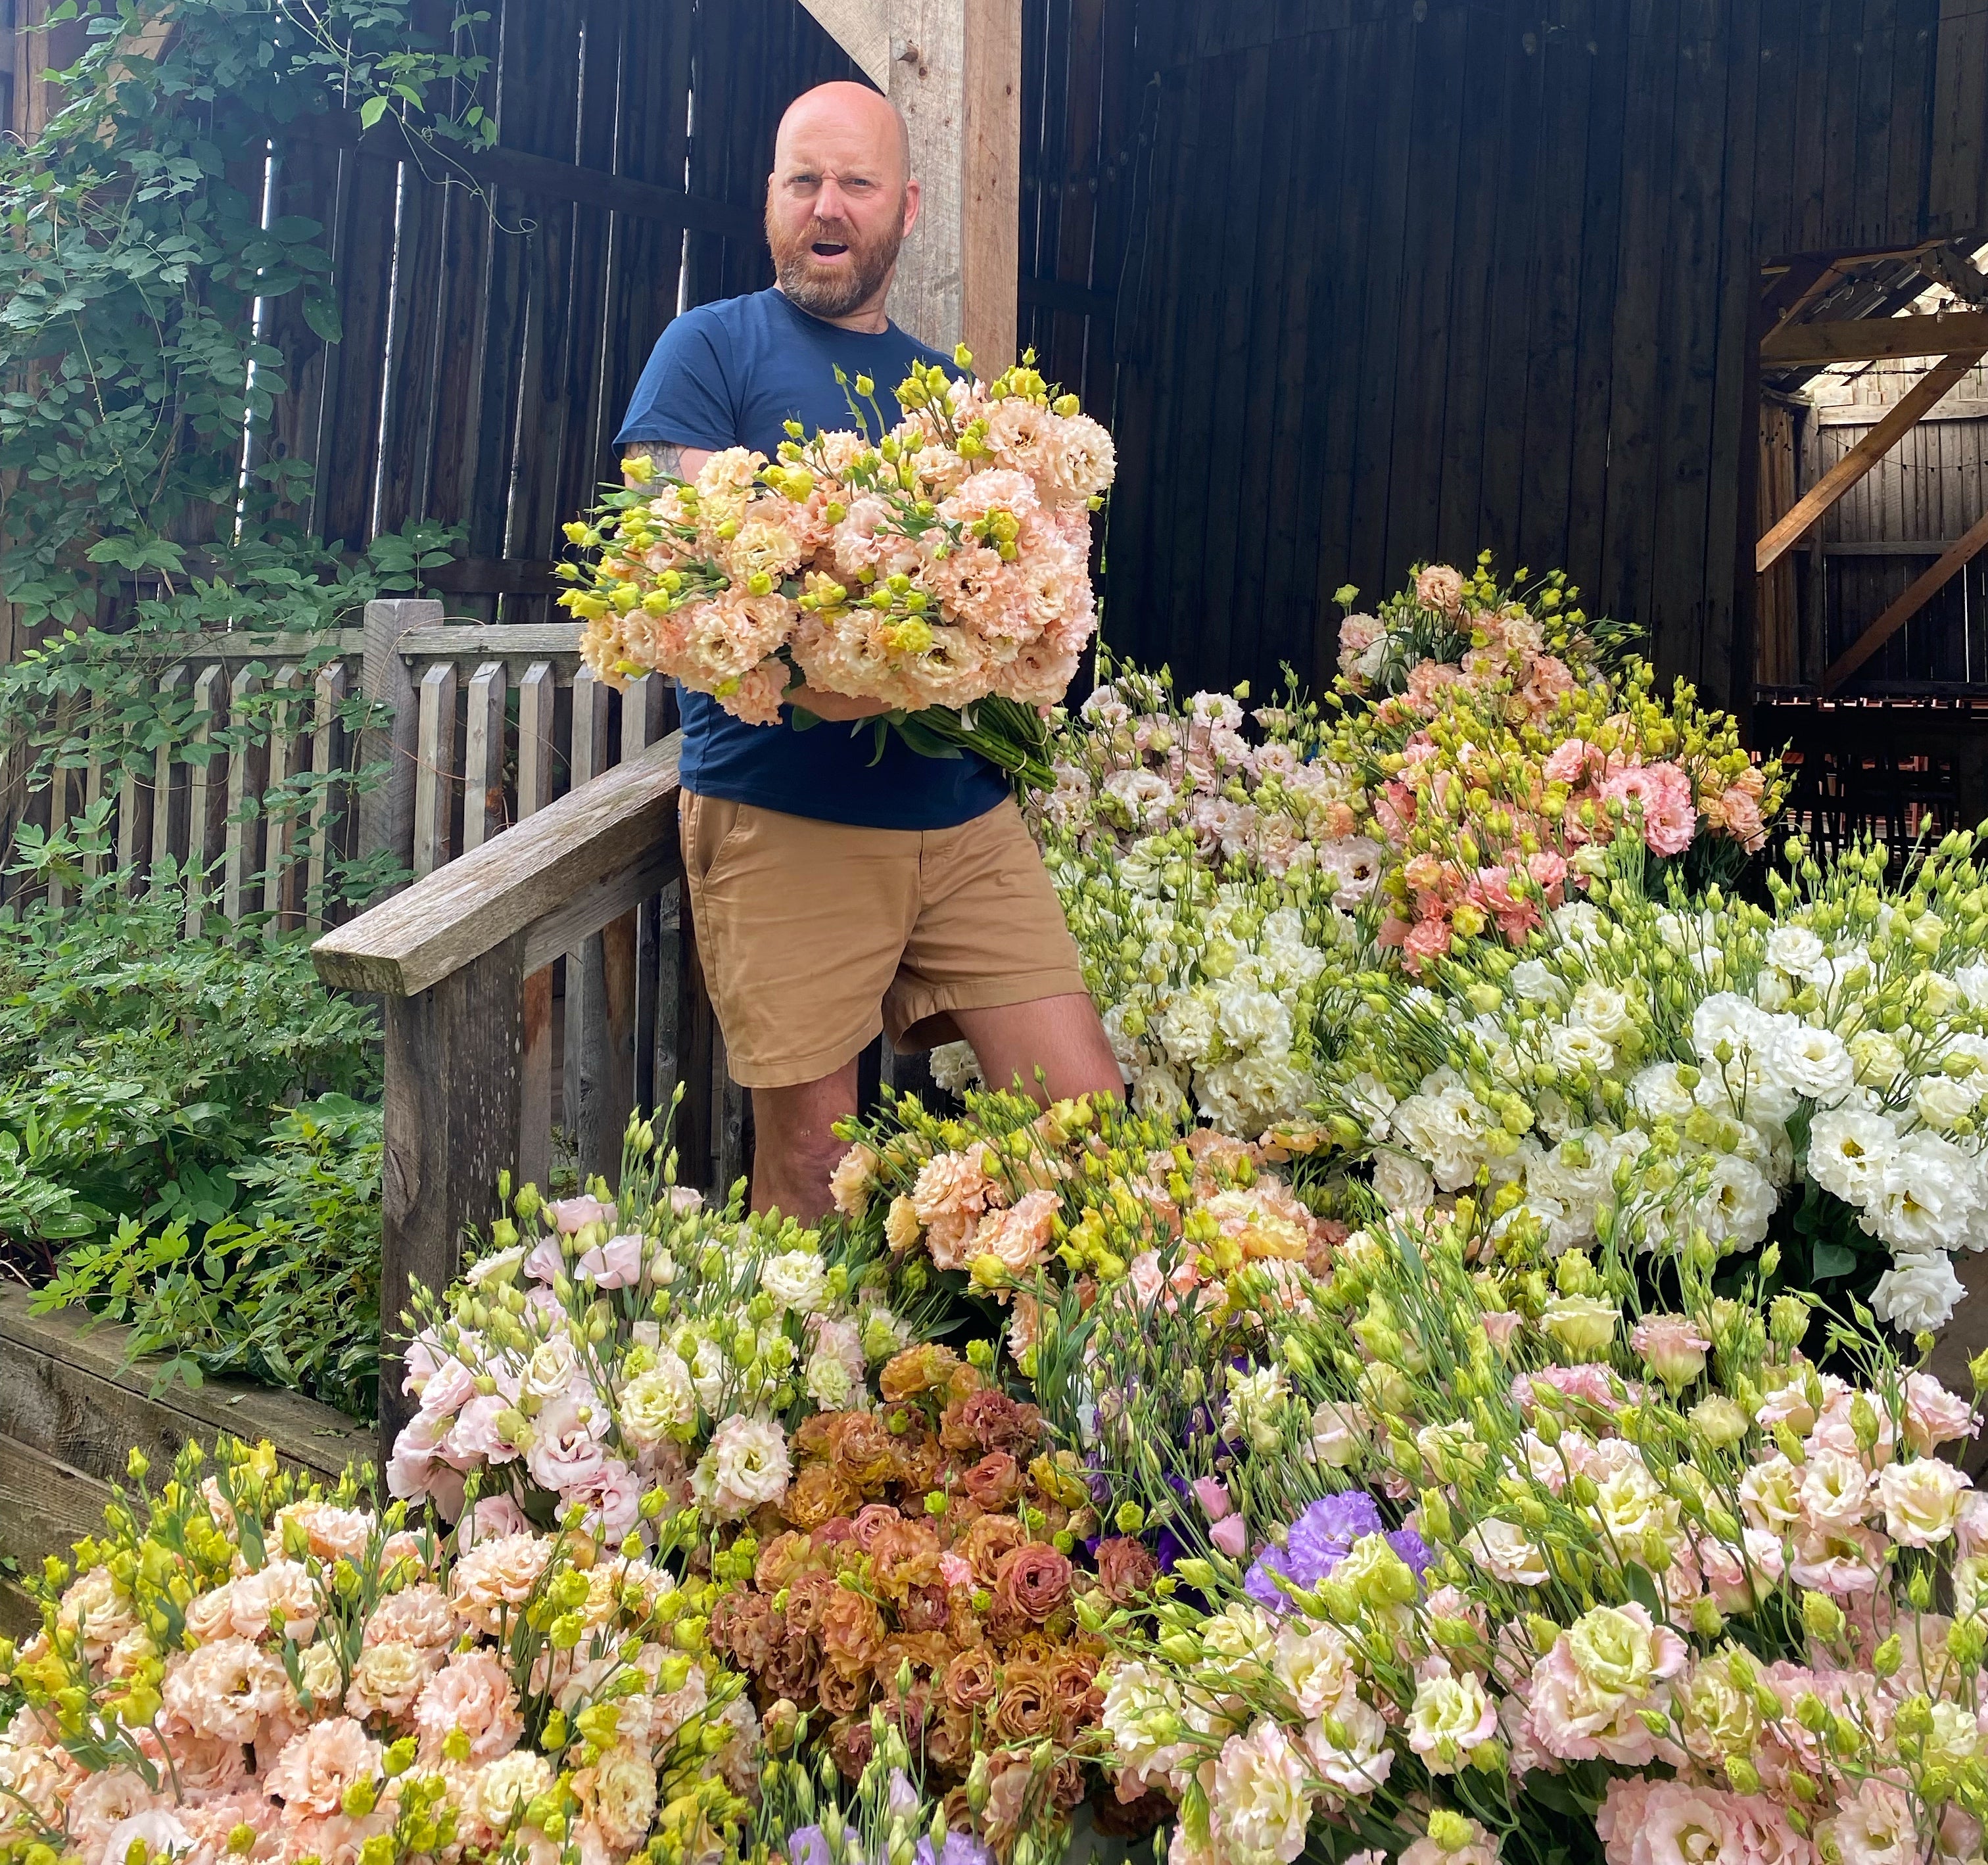 Bailey Hale at Ardelia Farm in the Party Barn with an armload of lisianthus